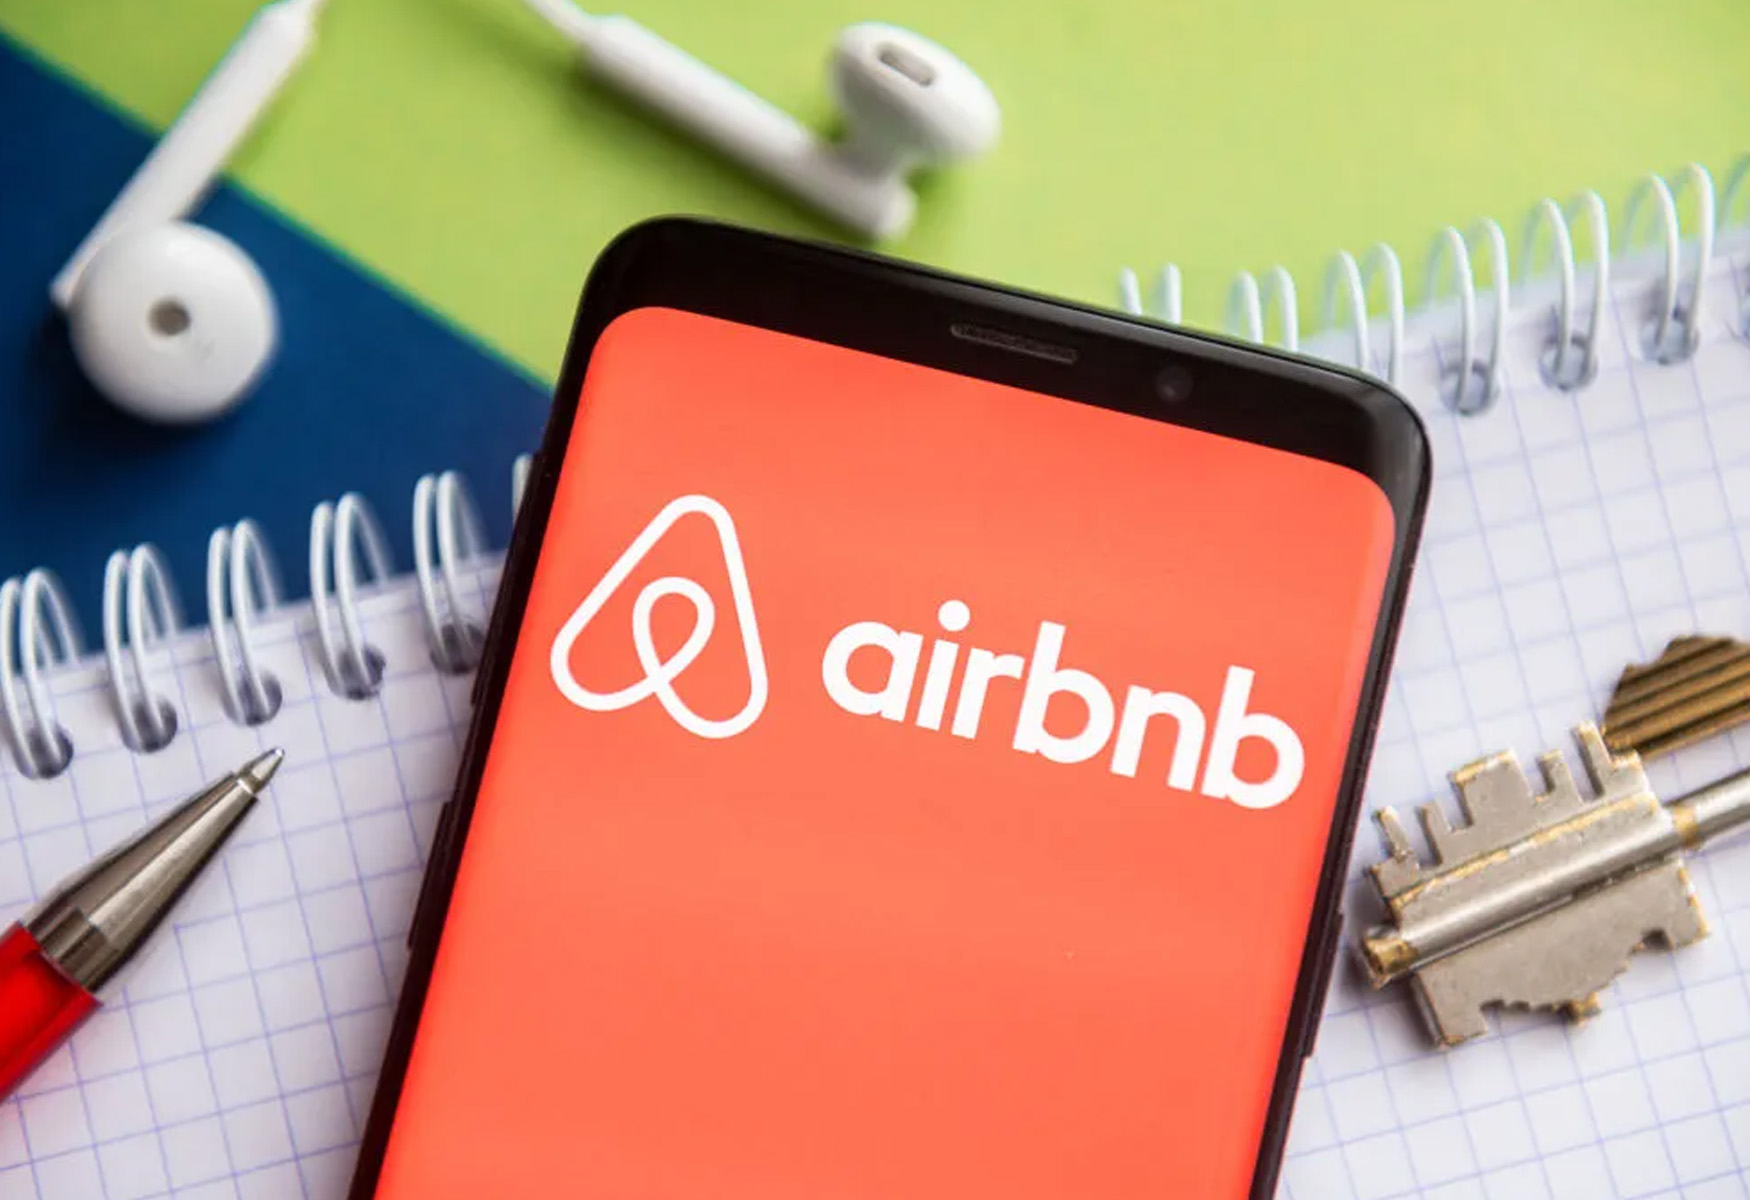 Airbnb 101: What IS Airbnb?